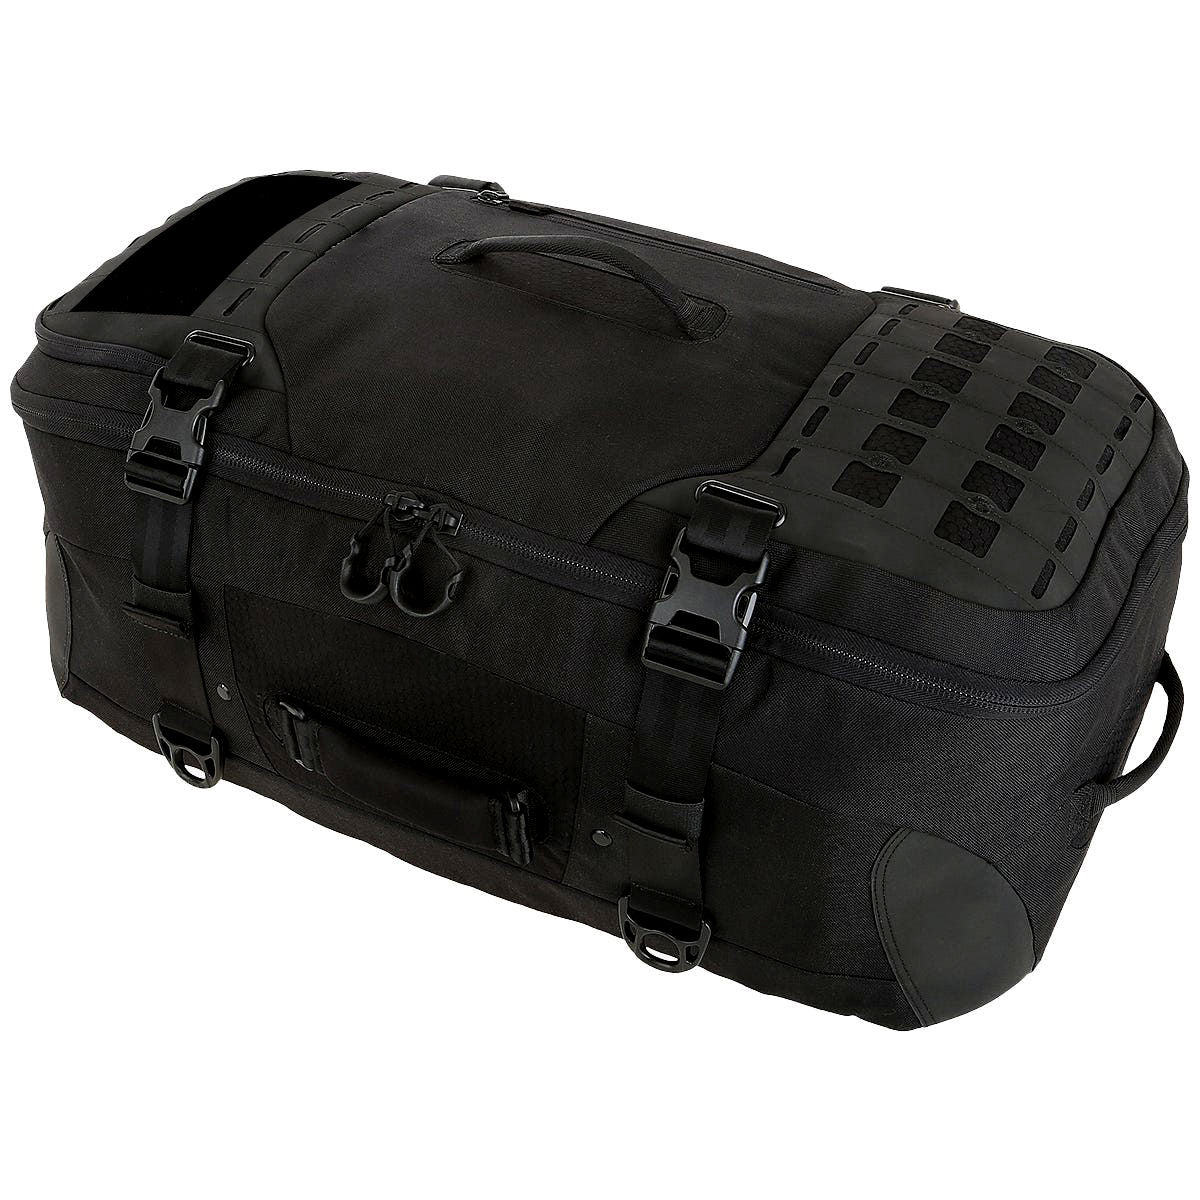 Expedition Pro Duffel Bag